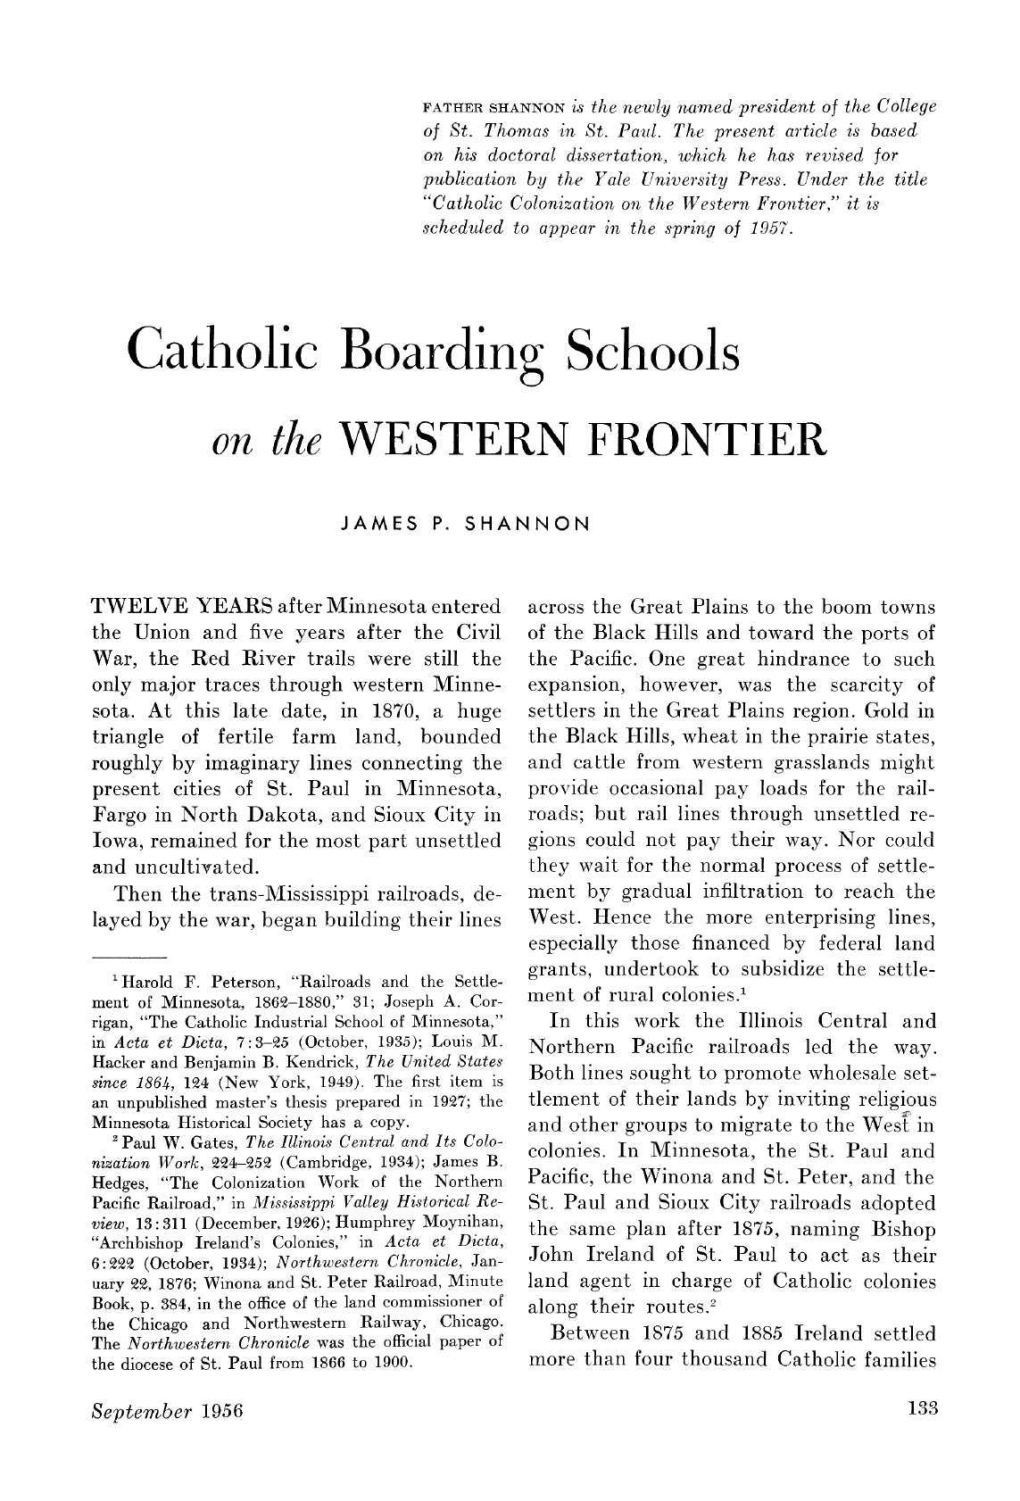 Catholic Boarding Schools on the Western Frontier